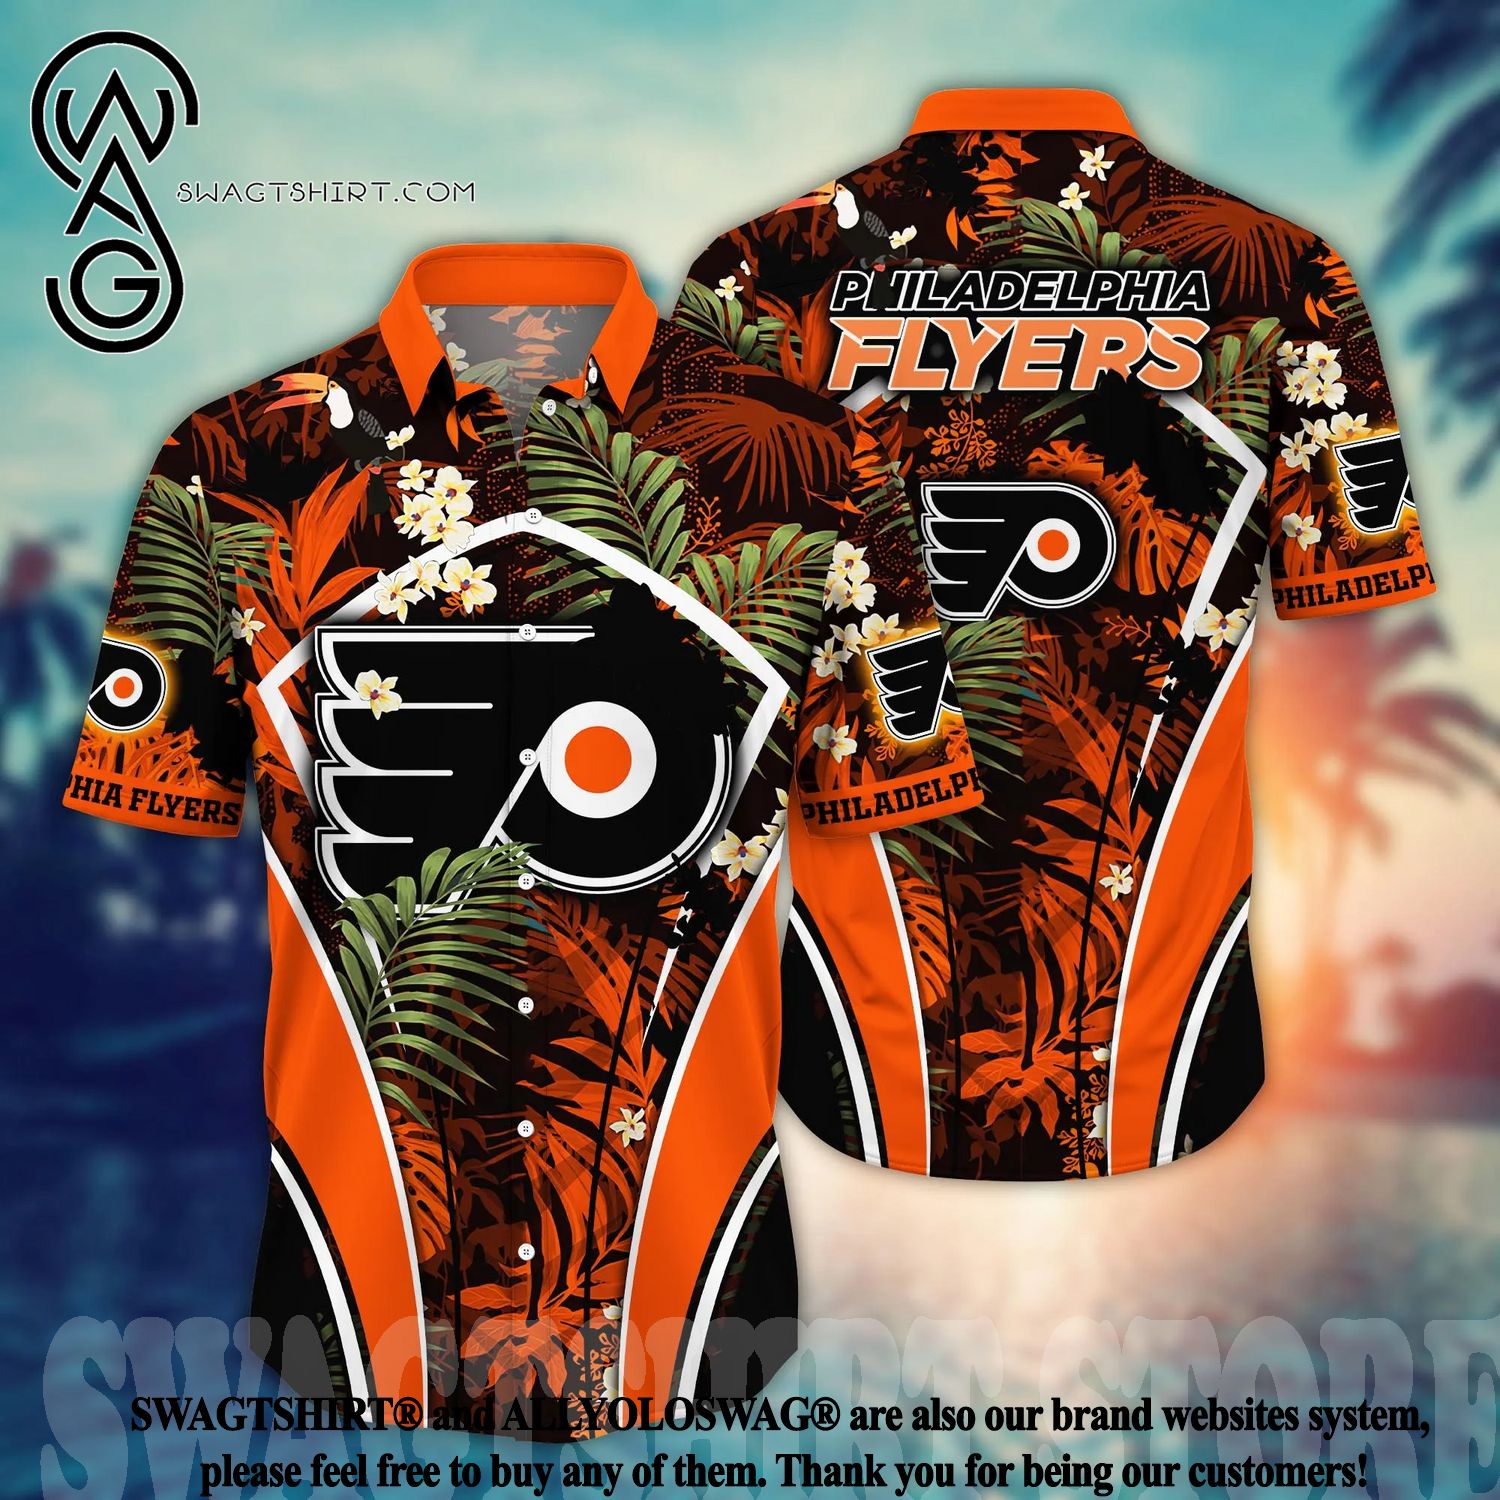 LIMITED] Philadelphia Flyers NHL Hawaiian Shirt And Shorts, New Collection  For This Summer Limited Edition